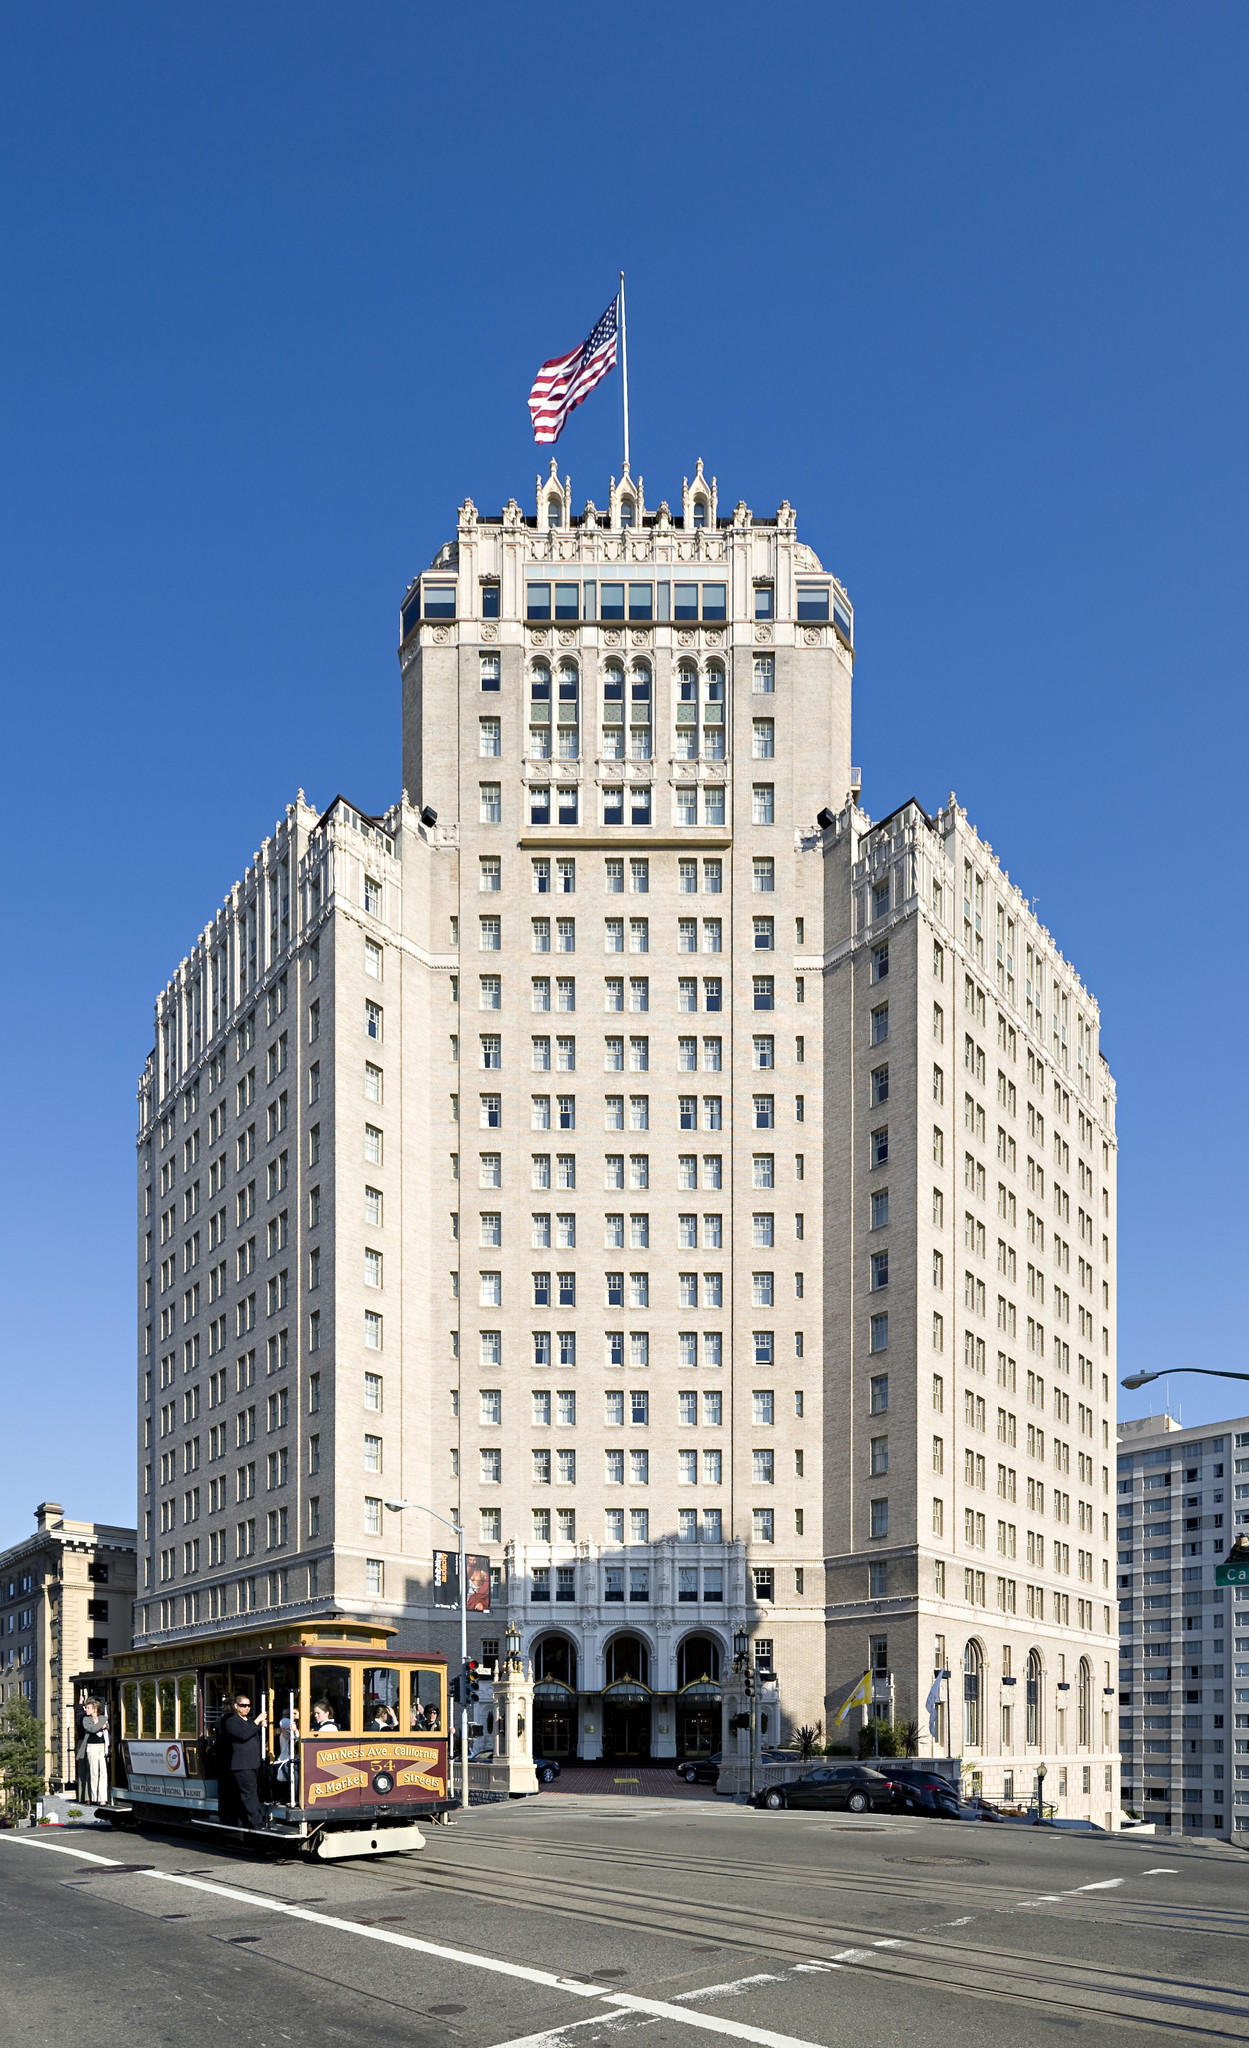 Mark Hopkins Hotel - LA investors buy famed Mark Hopkins hotel in San Francisco - latimes - Feb 20, 2014 ... The landmark Mark Hopkins Hotel on San Francisco Nob Hill is being acquired   for $120 million by Los Angeles investors who are expandingÂ ...